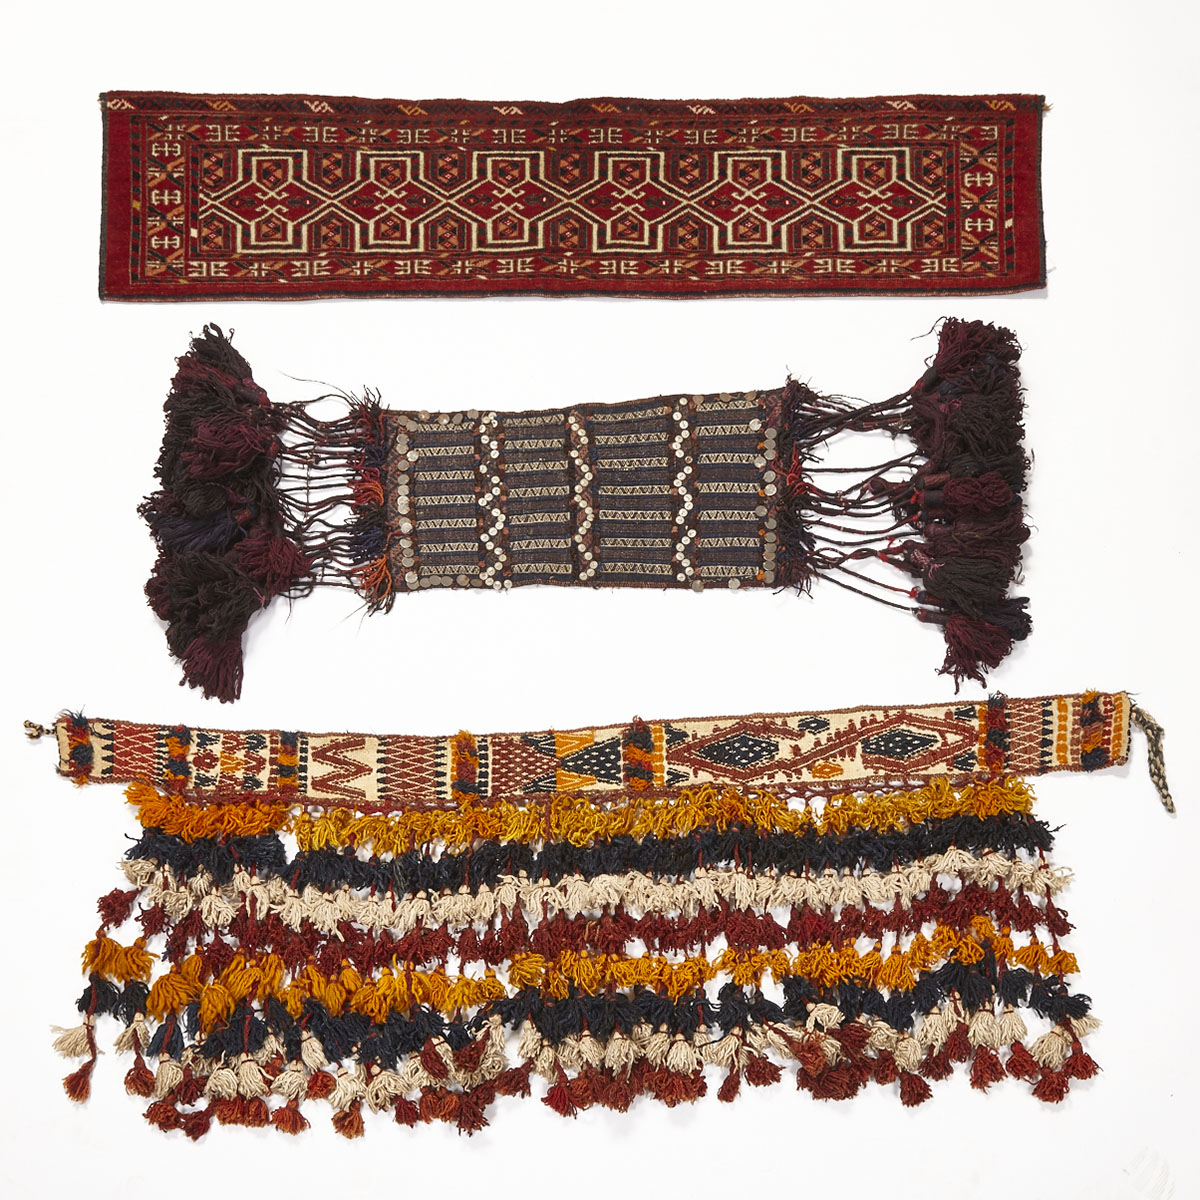 Turkoman Torba together with Two Tribal Woven Trappings, c.1930